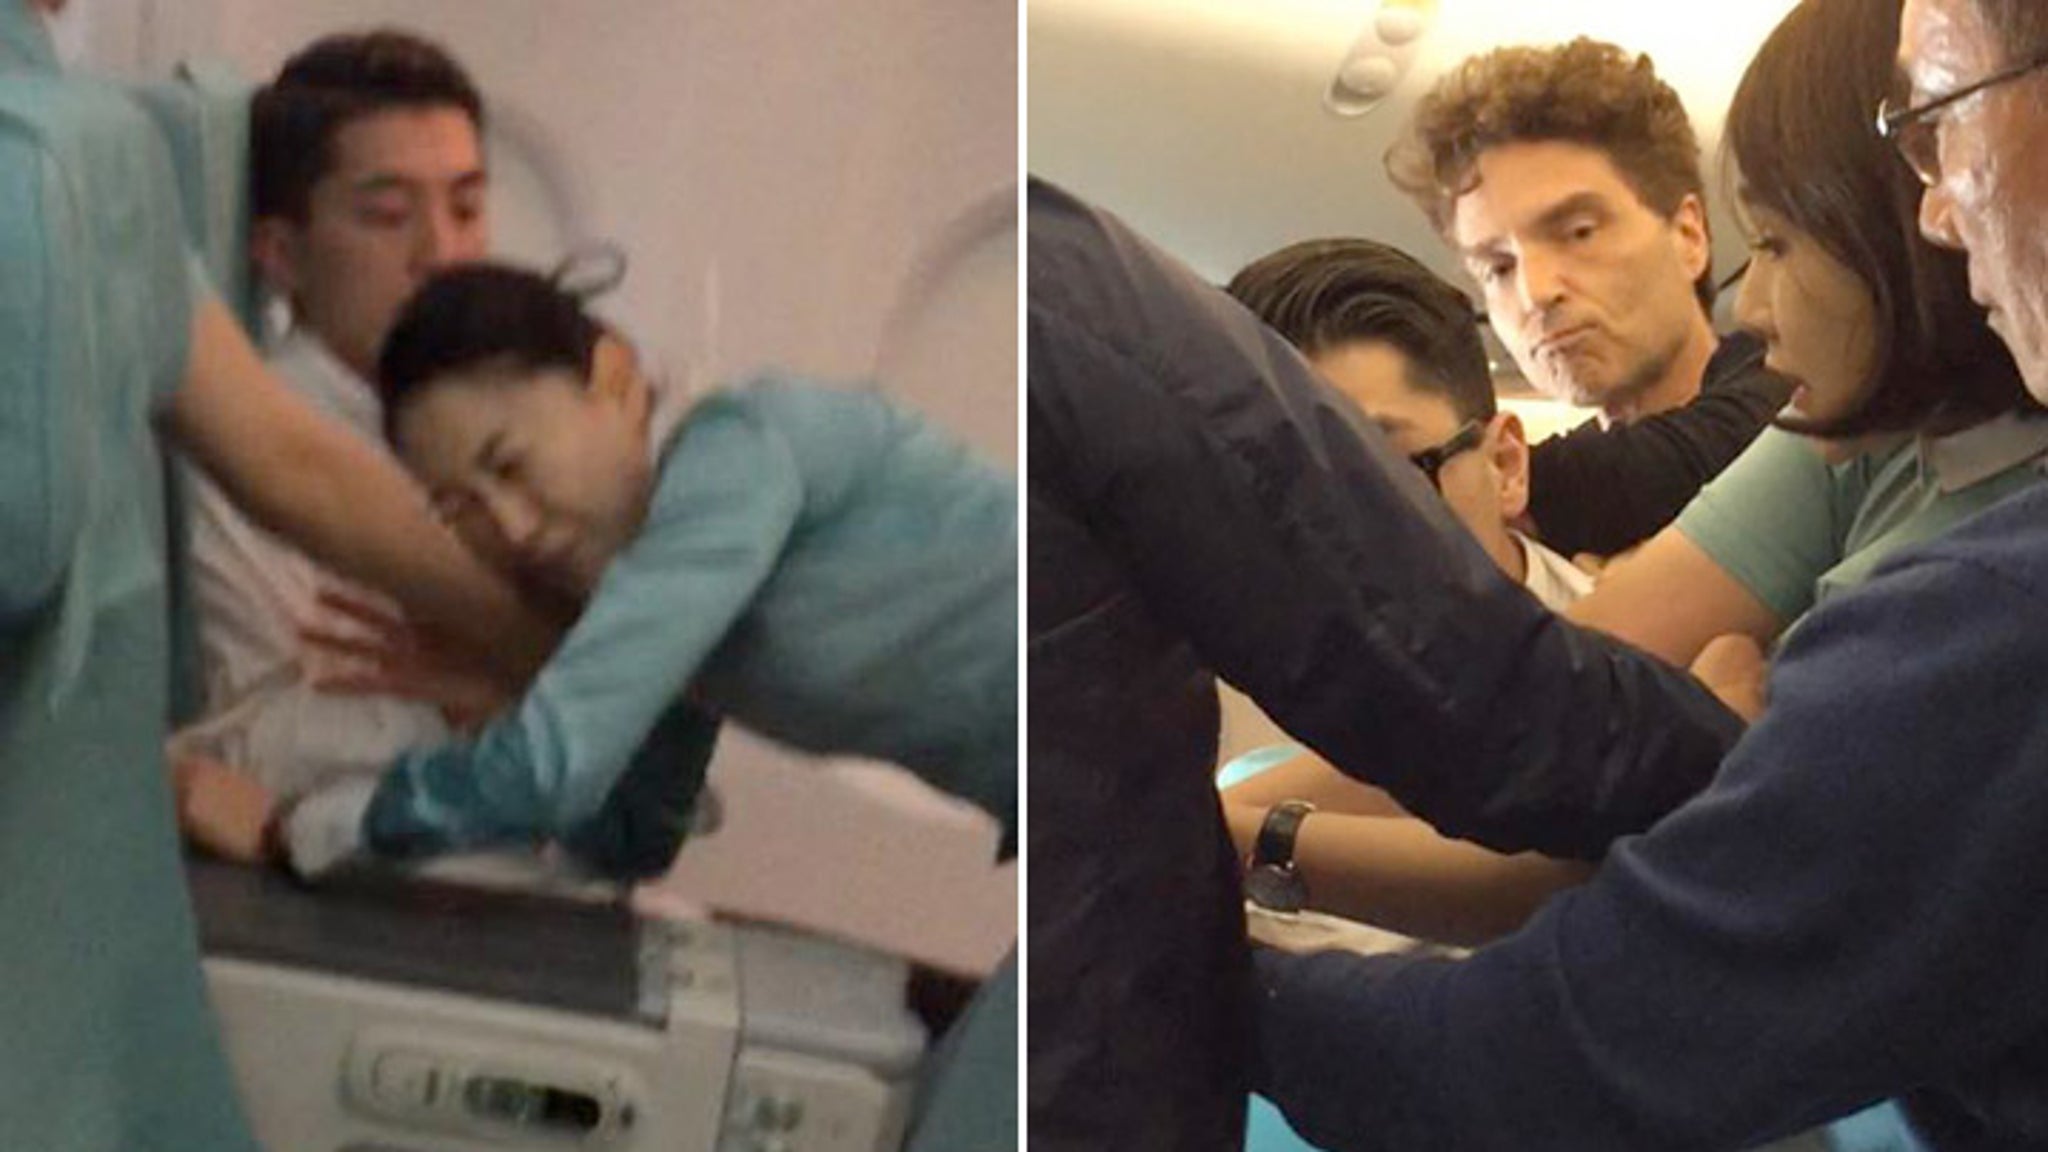 Richard Marx And Daisy Fuentes Help Take Down Attacking Passenger 